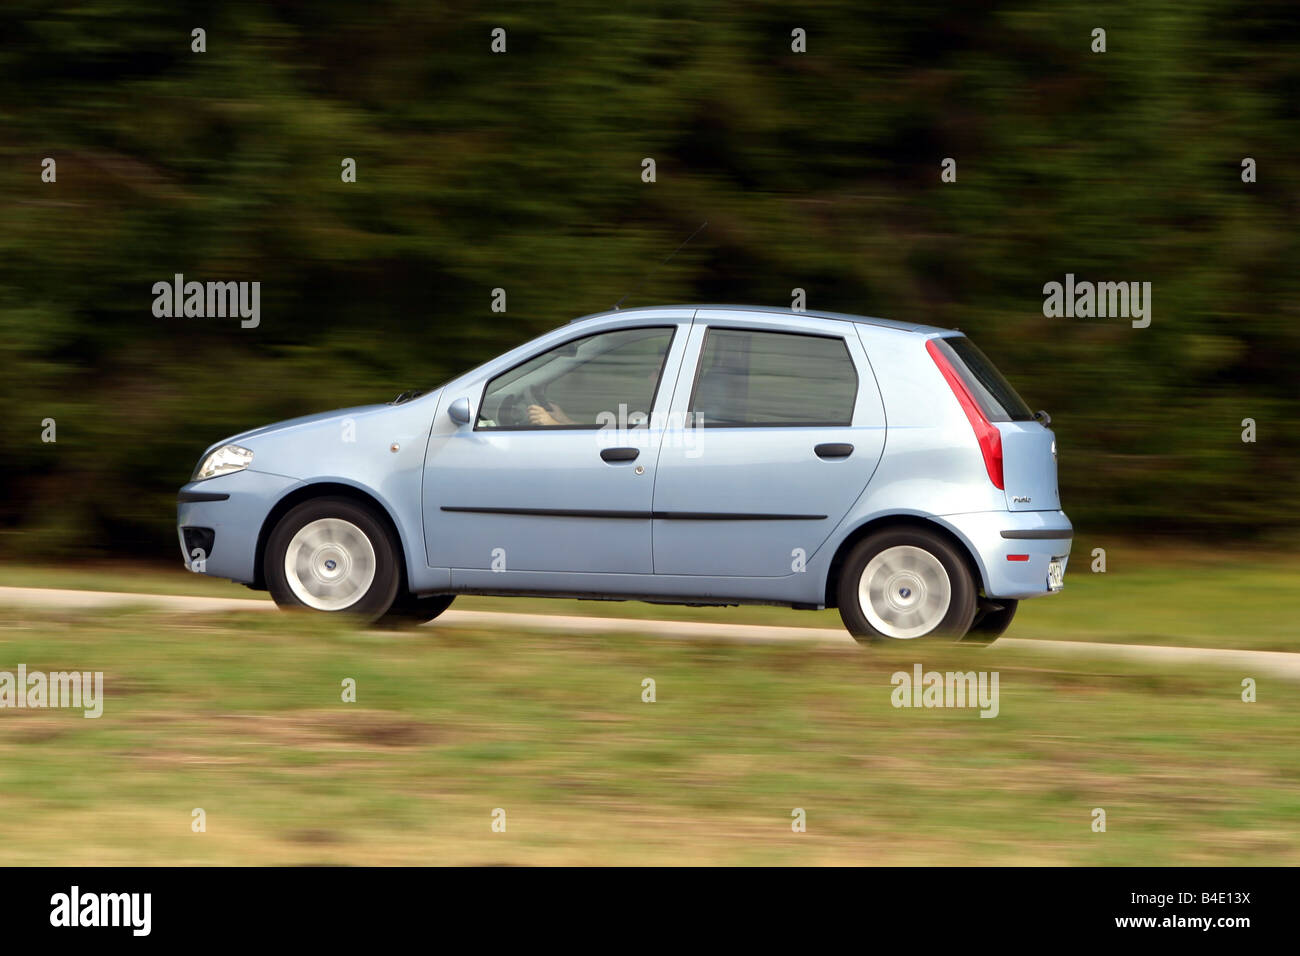 Car, Fiat Punto 1.3 JTD, small approx., Limousine, model year 2003-, silver, driving, side view, country road Stock Photo